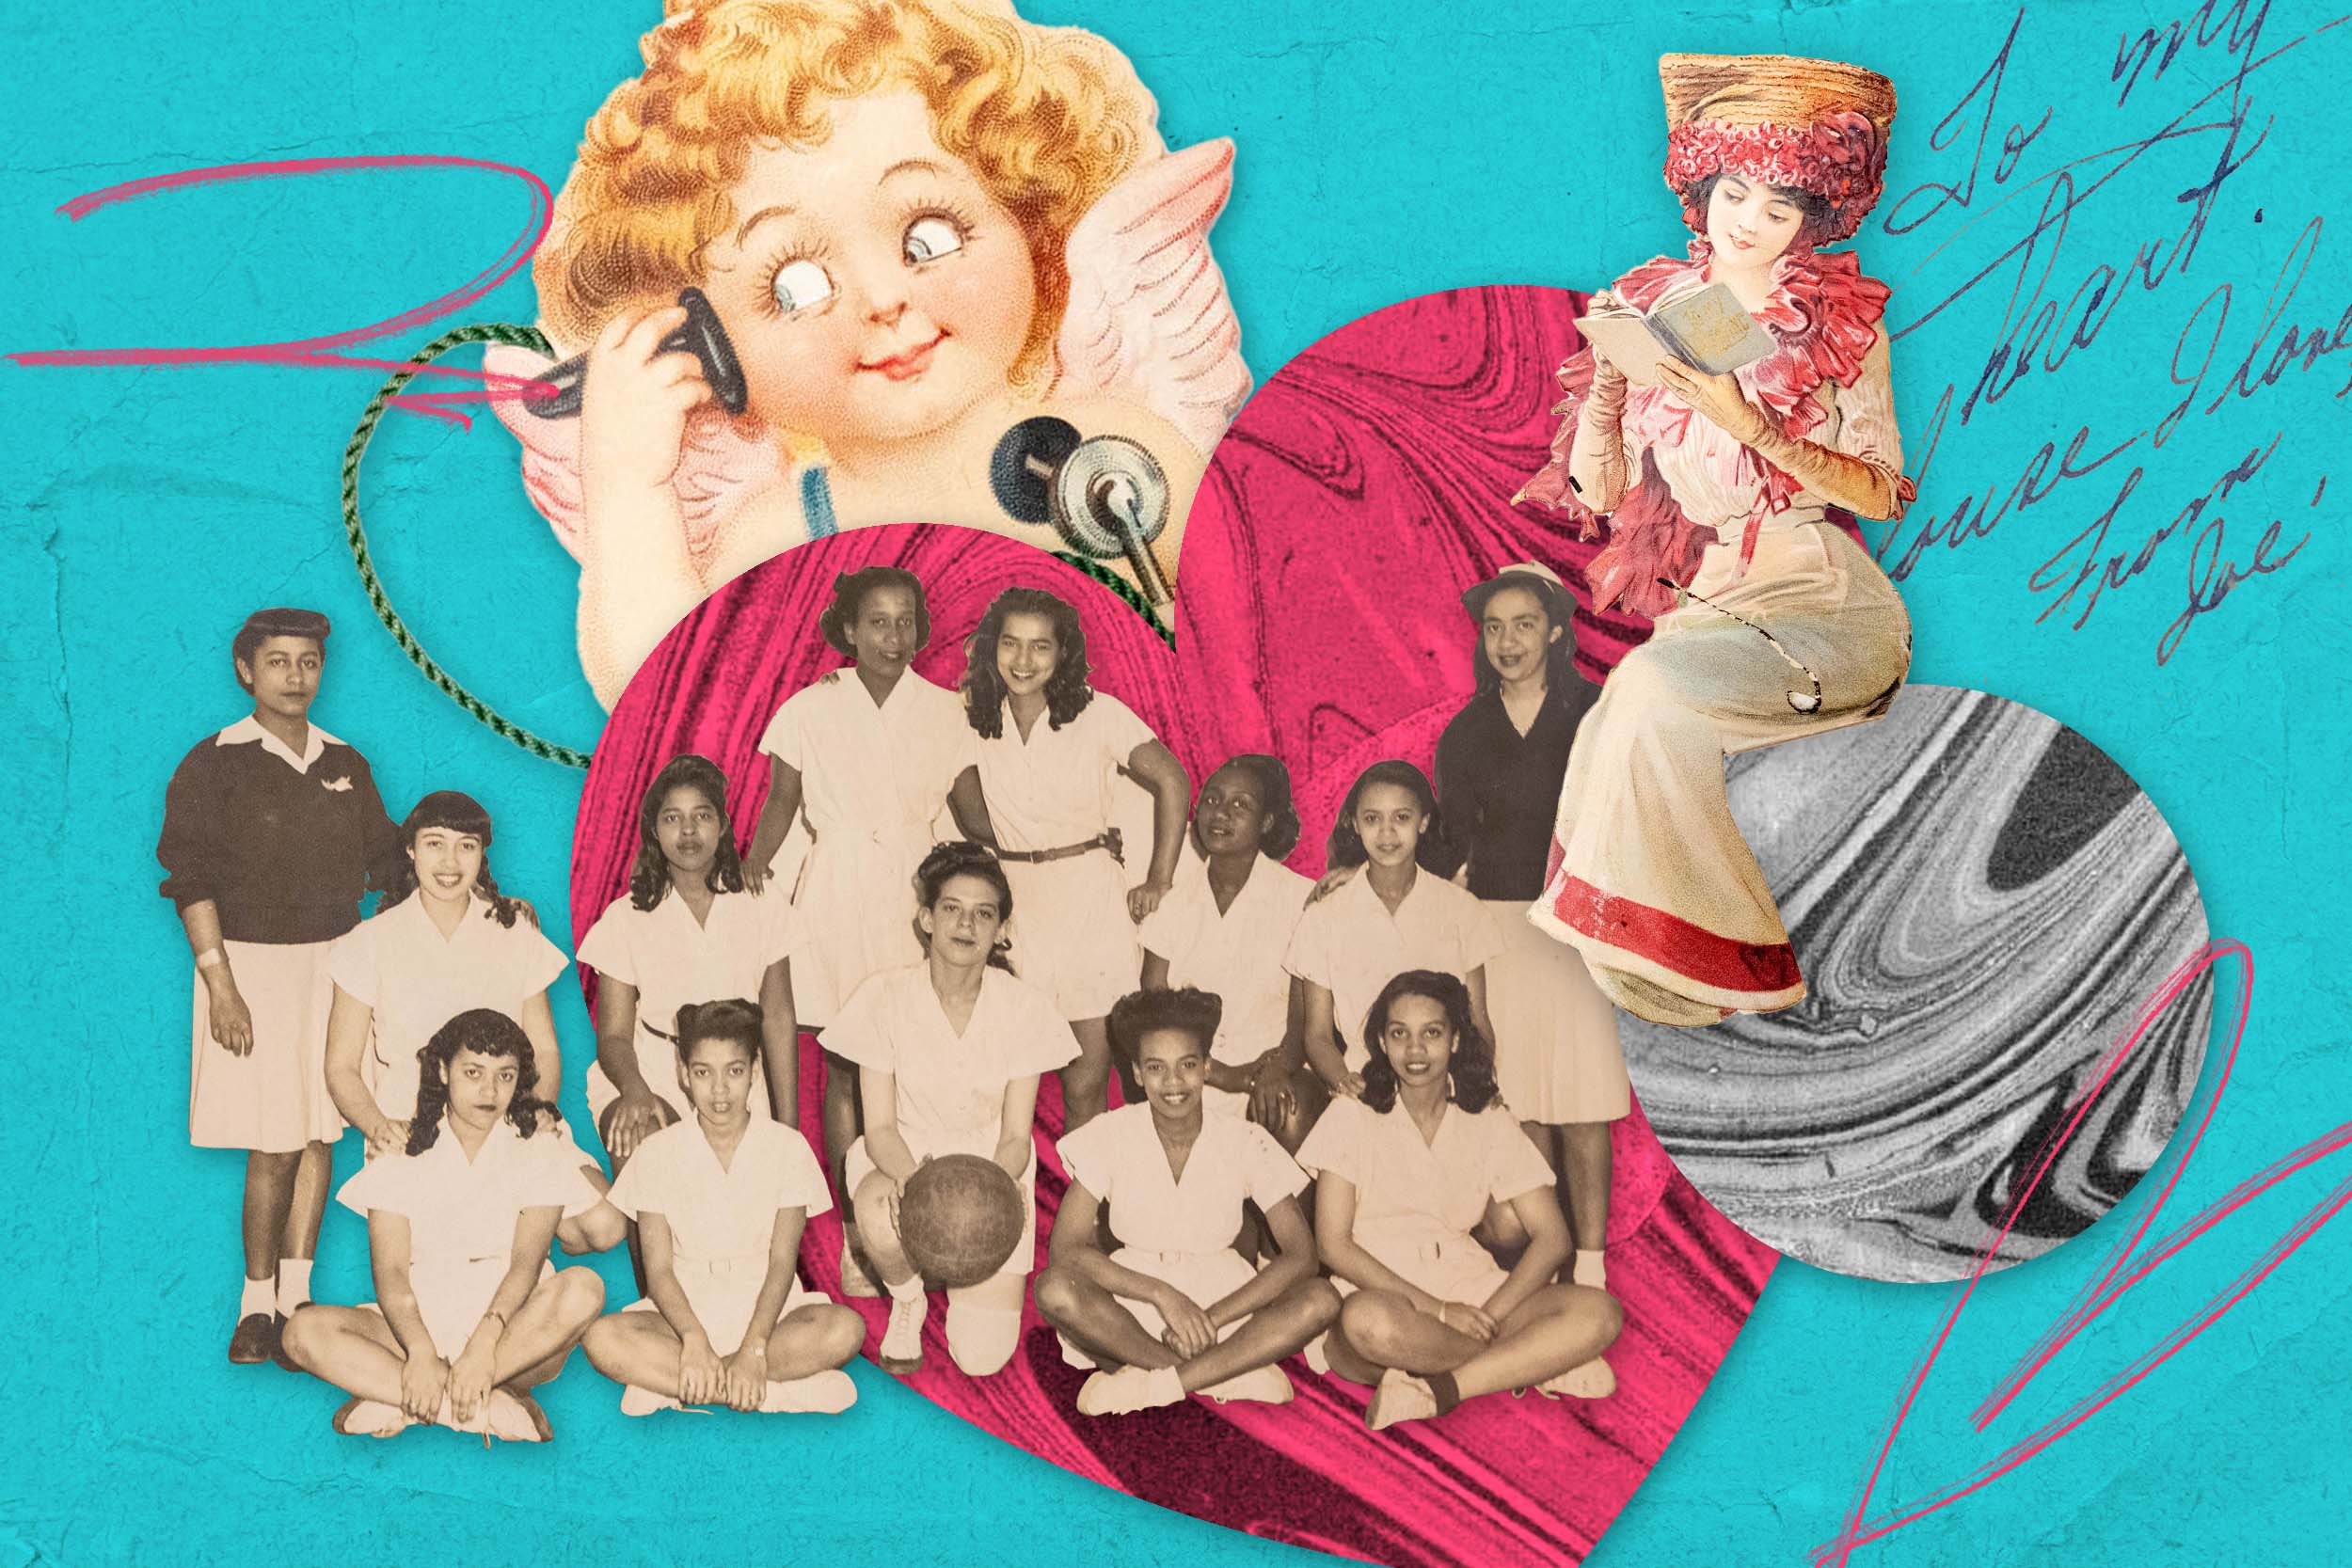 A collage of images: cupid, group photo of women, and an old painting of a woman sitting reading a book